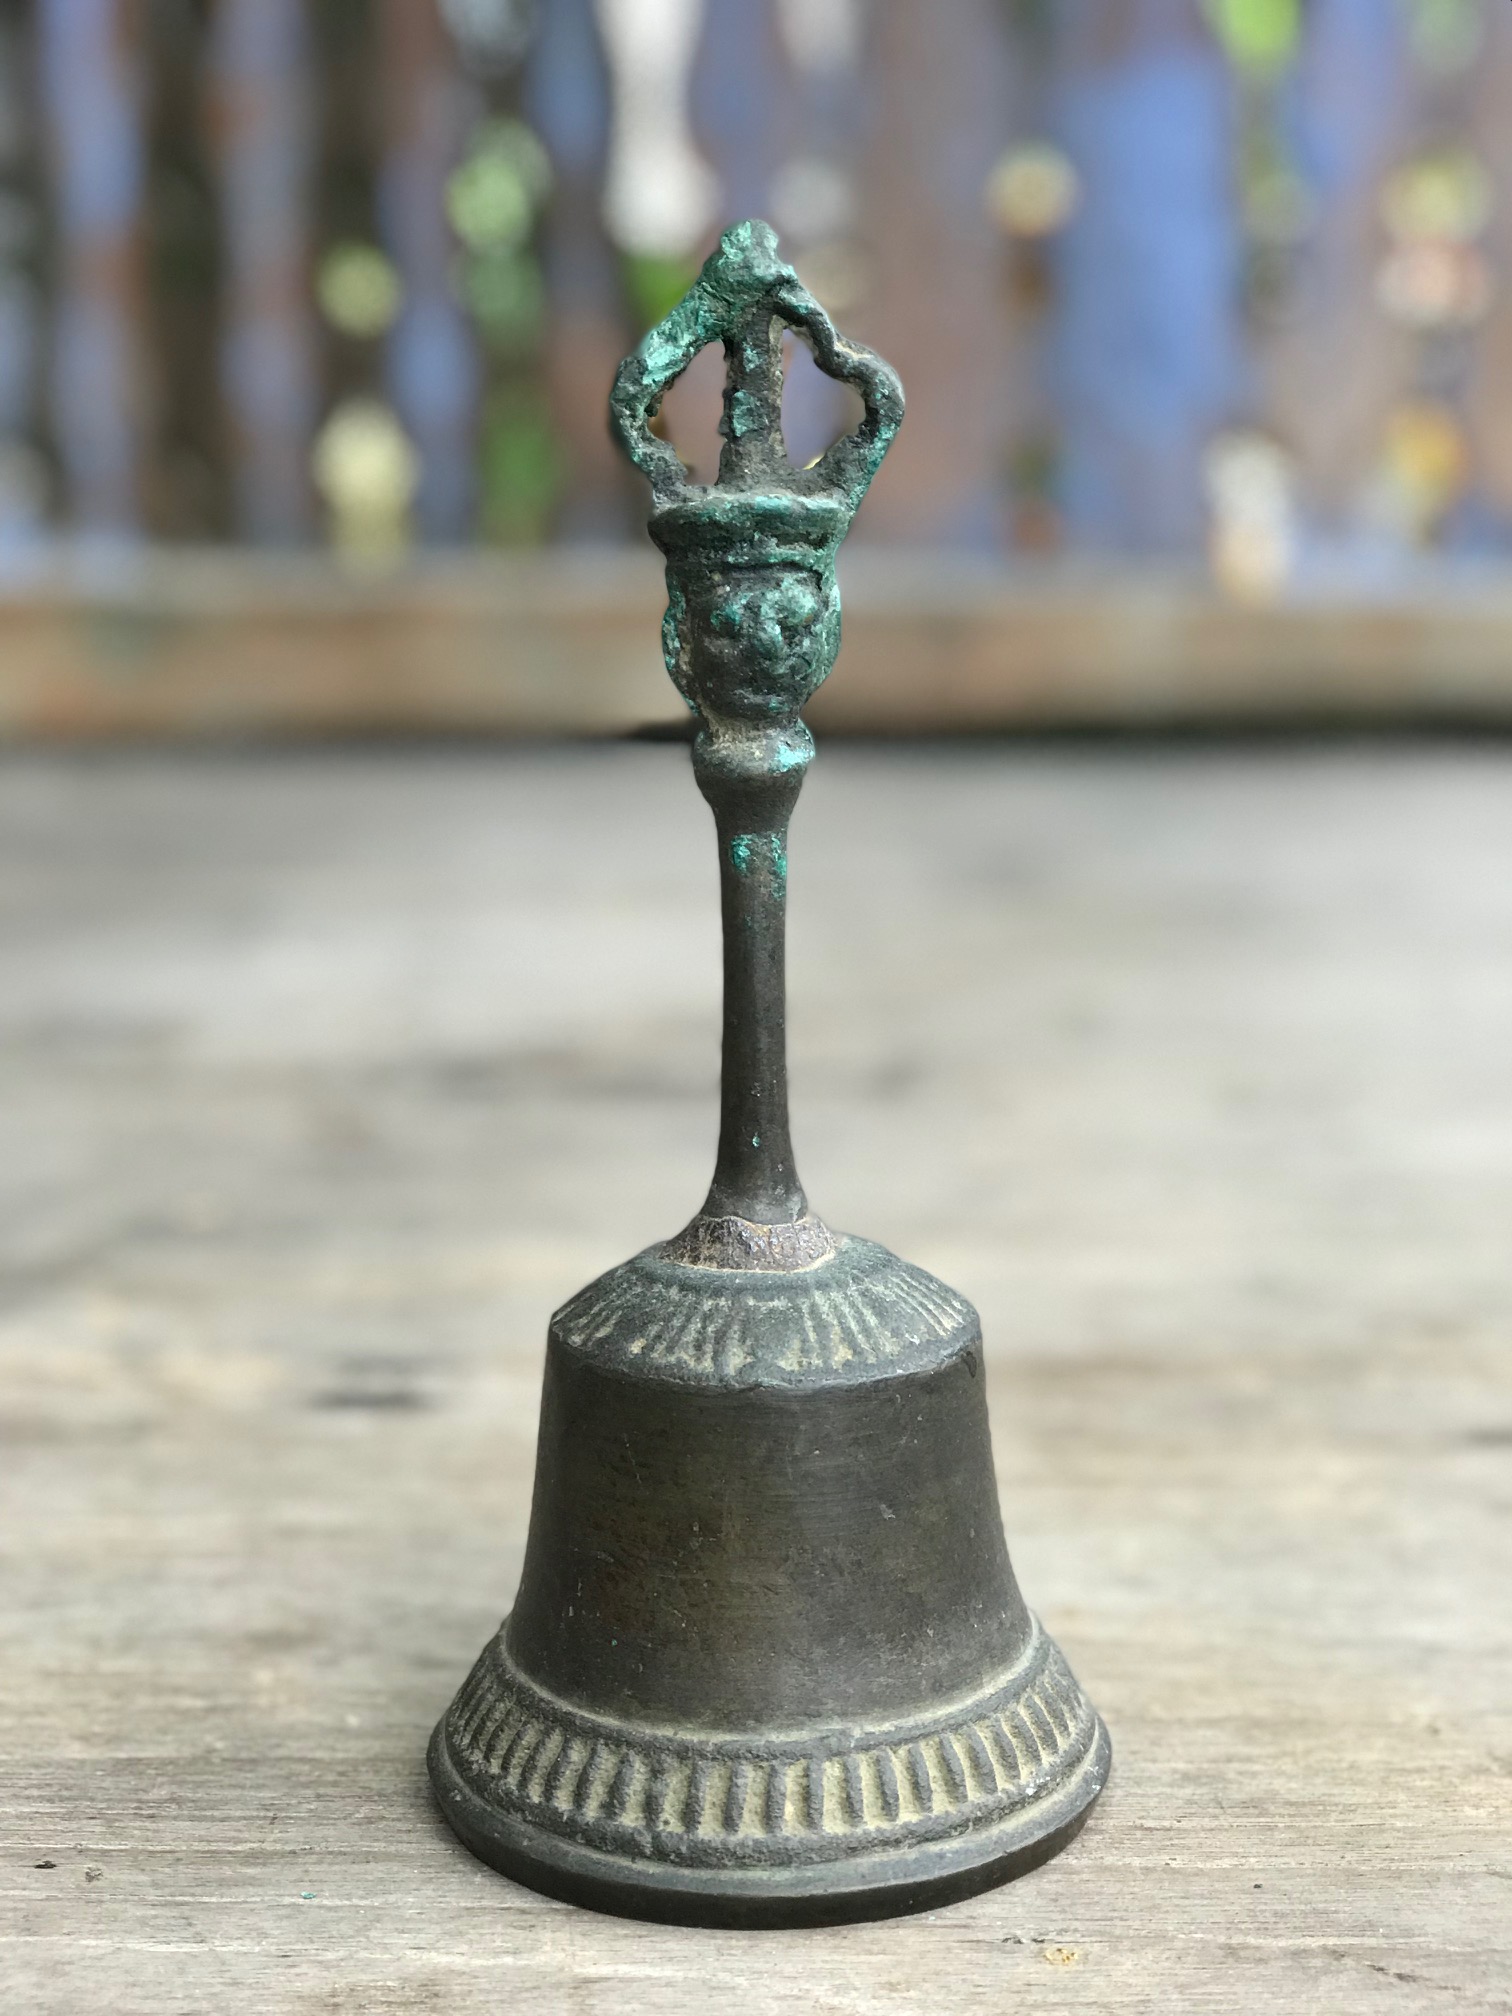 Musical Instrument Temple Clapper Bell with Face, Nepal, 100 years old, Bronze, 8 1/4" x 3 1/4", $1100., thedavidalancollection.com , solana beach, ca